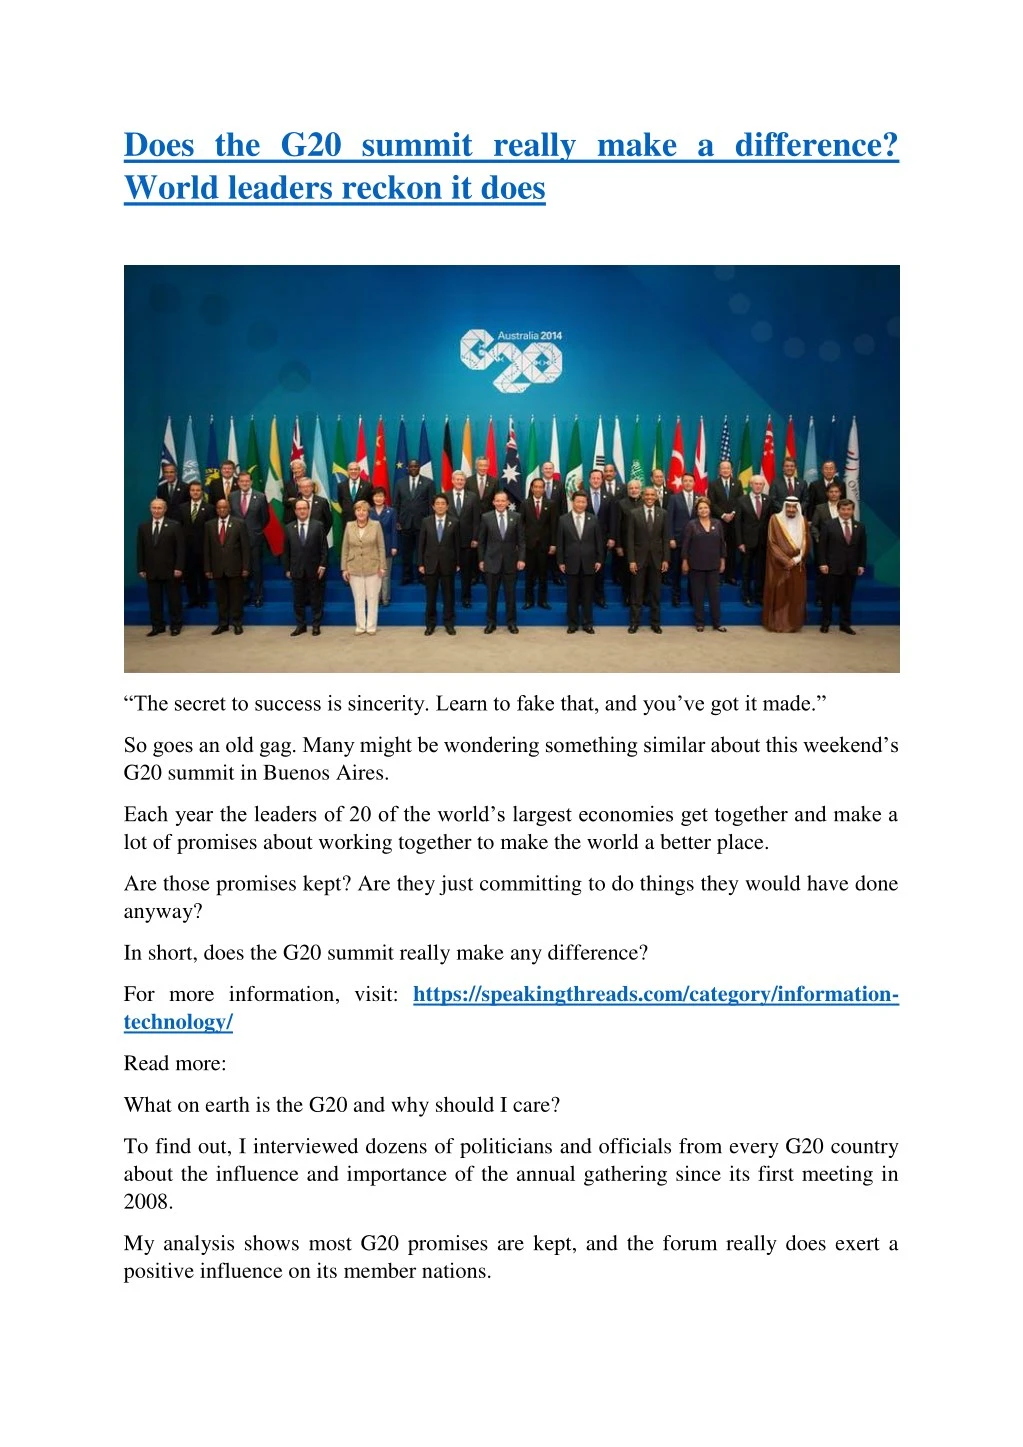 does the g20 summit really make a difference